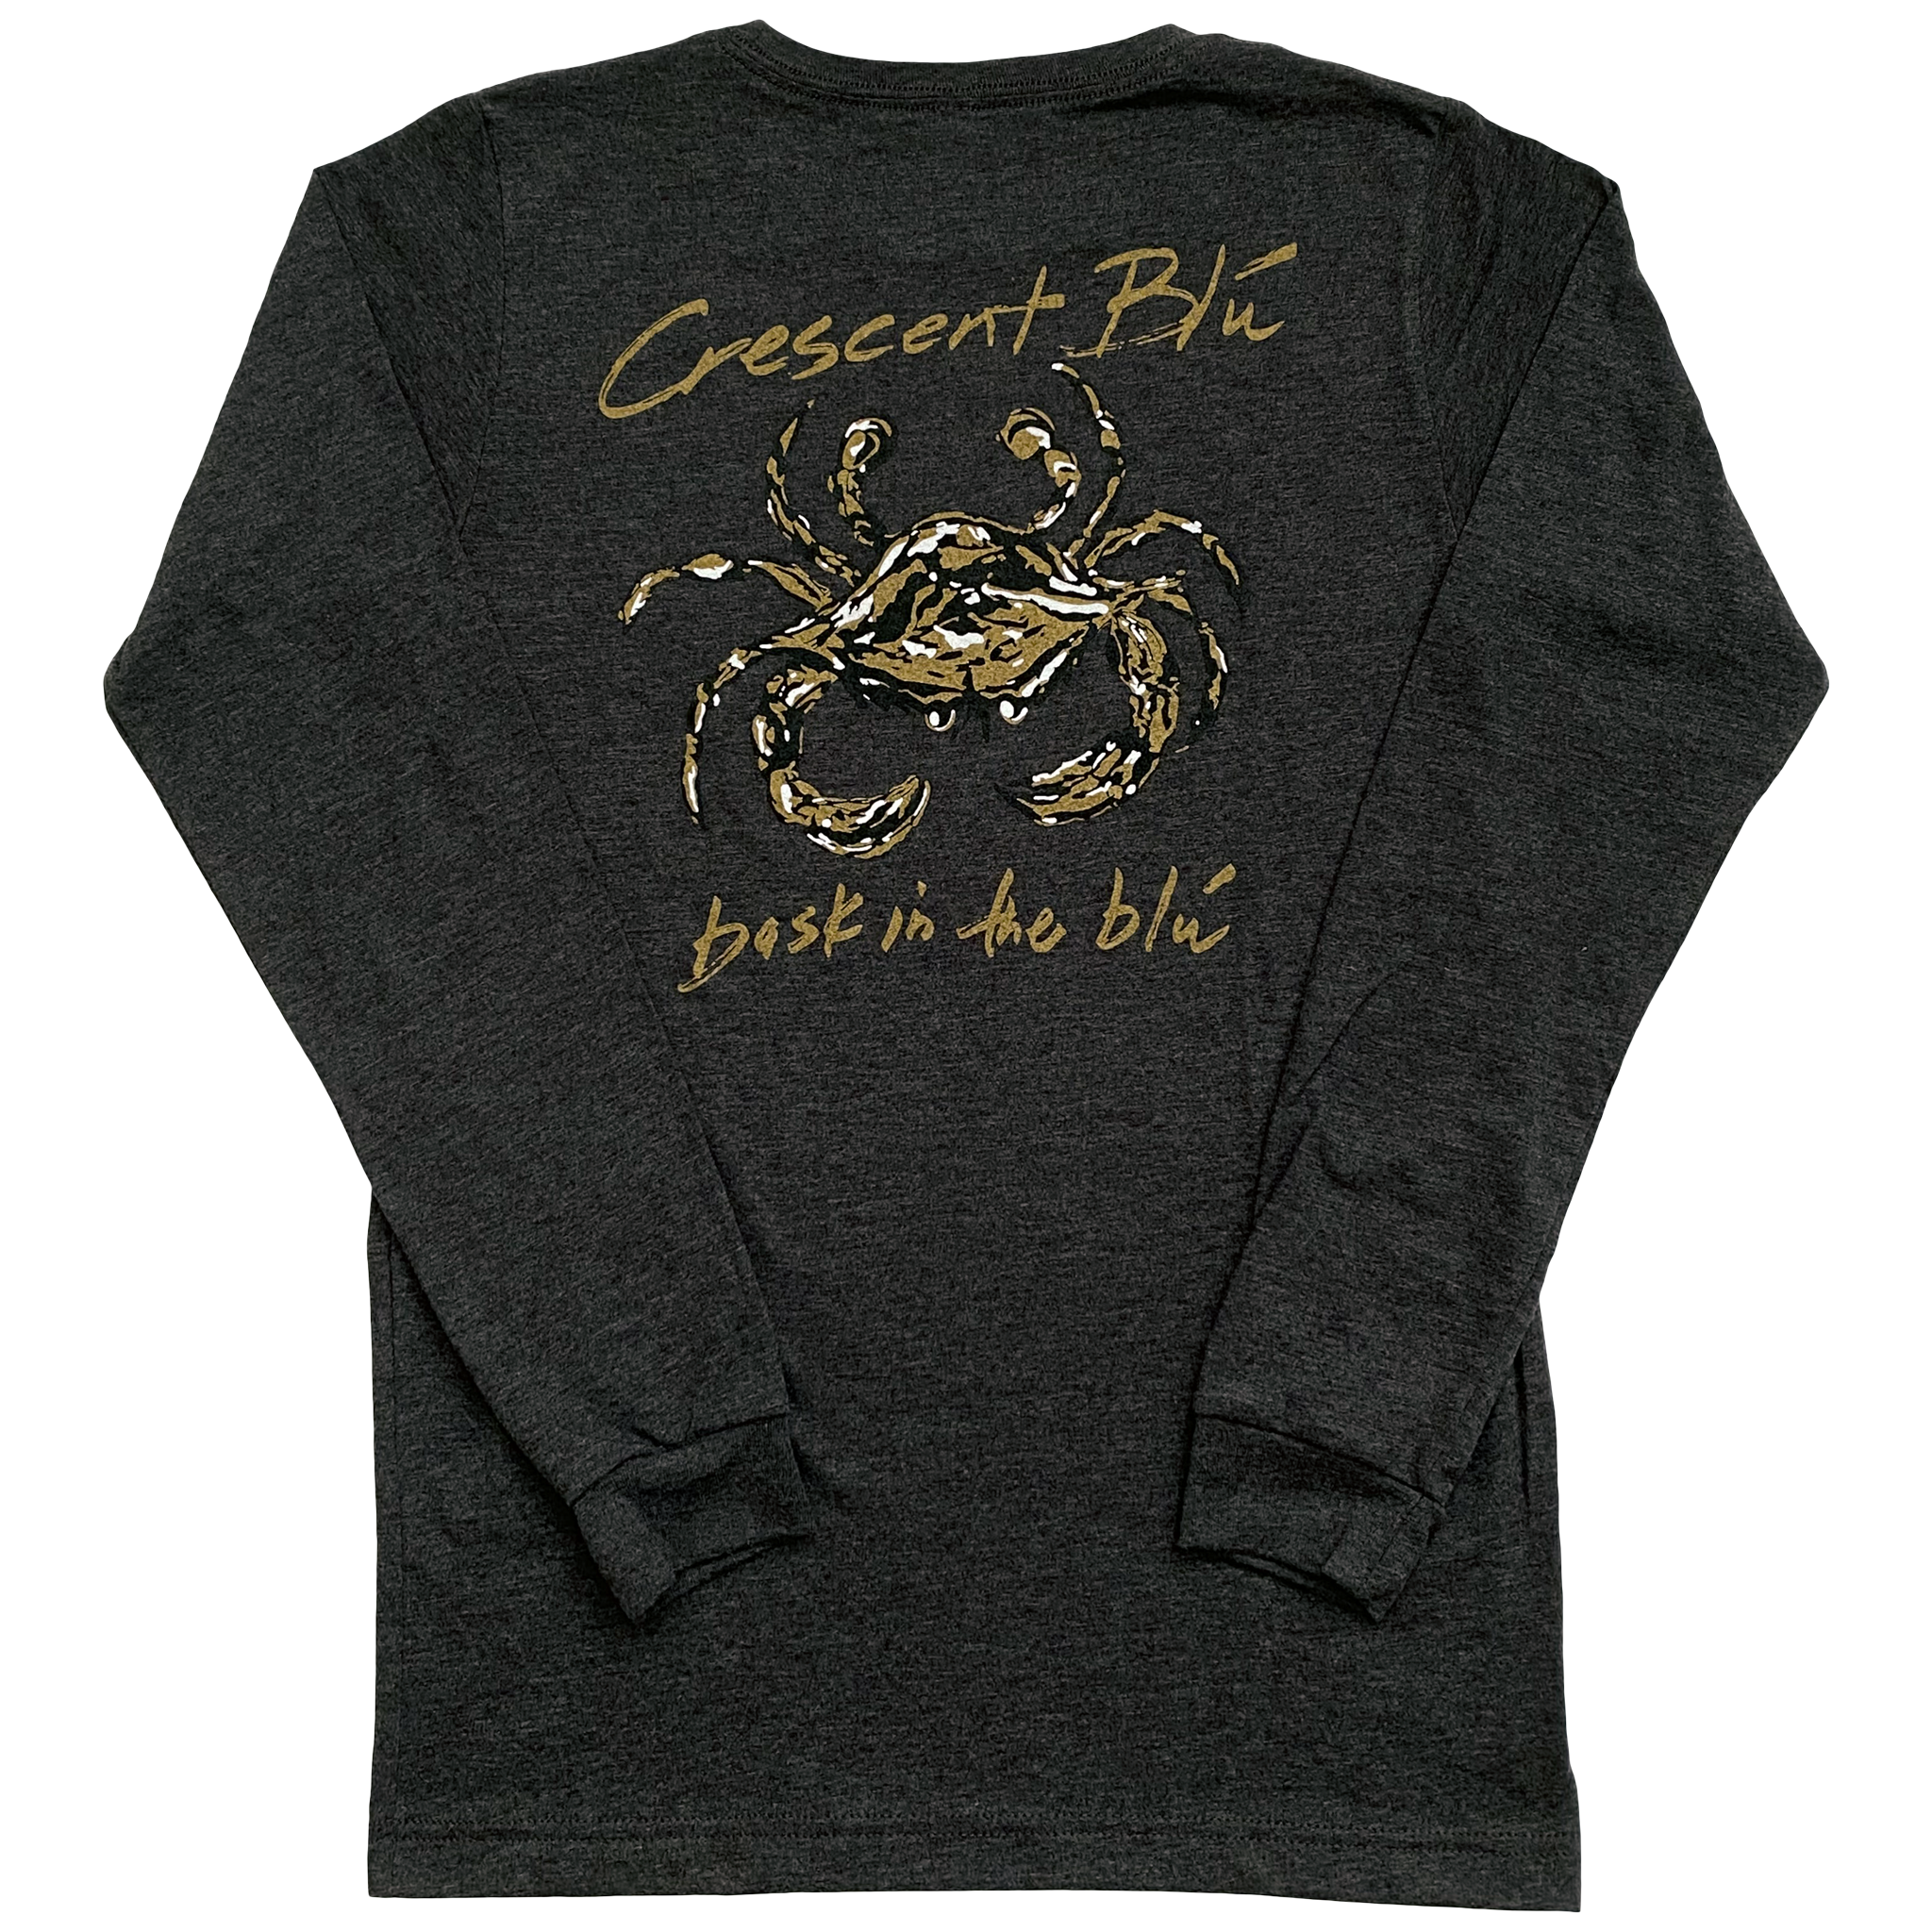 A black, gold, and white crab centered on the back of a long sleeve dark heather gray t-shirt.  In gold above the crab is Crescent Blu, below the crab in gold is bask in the blu.